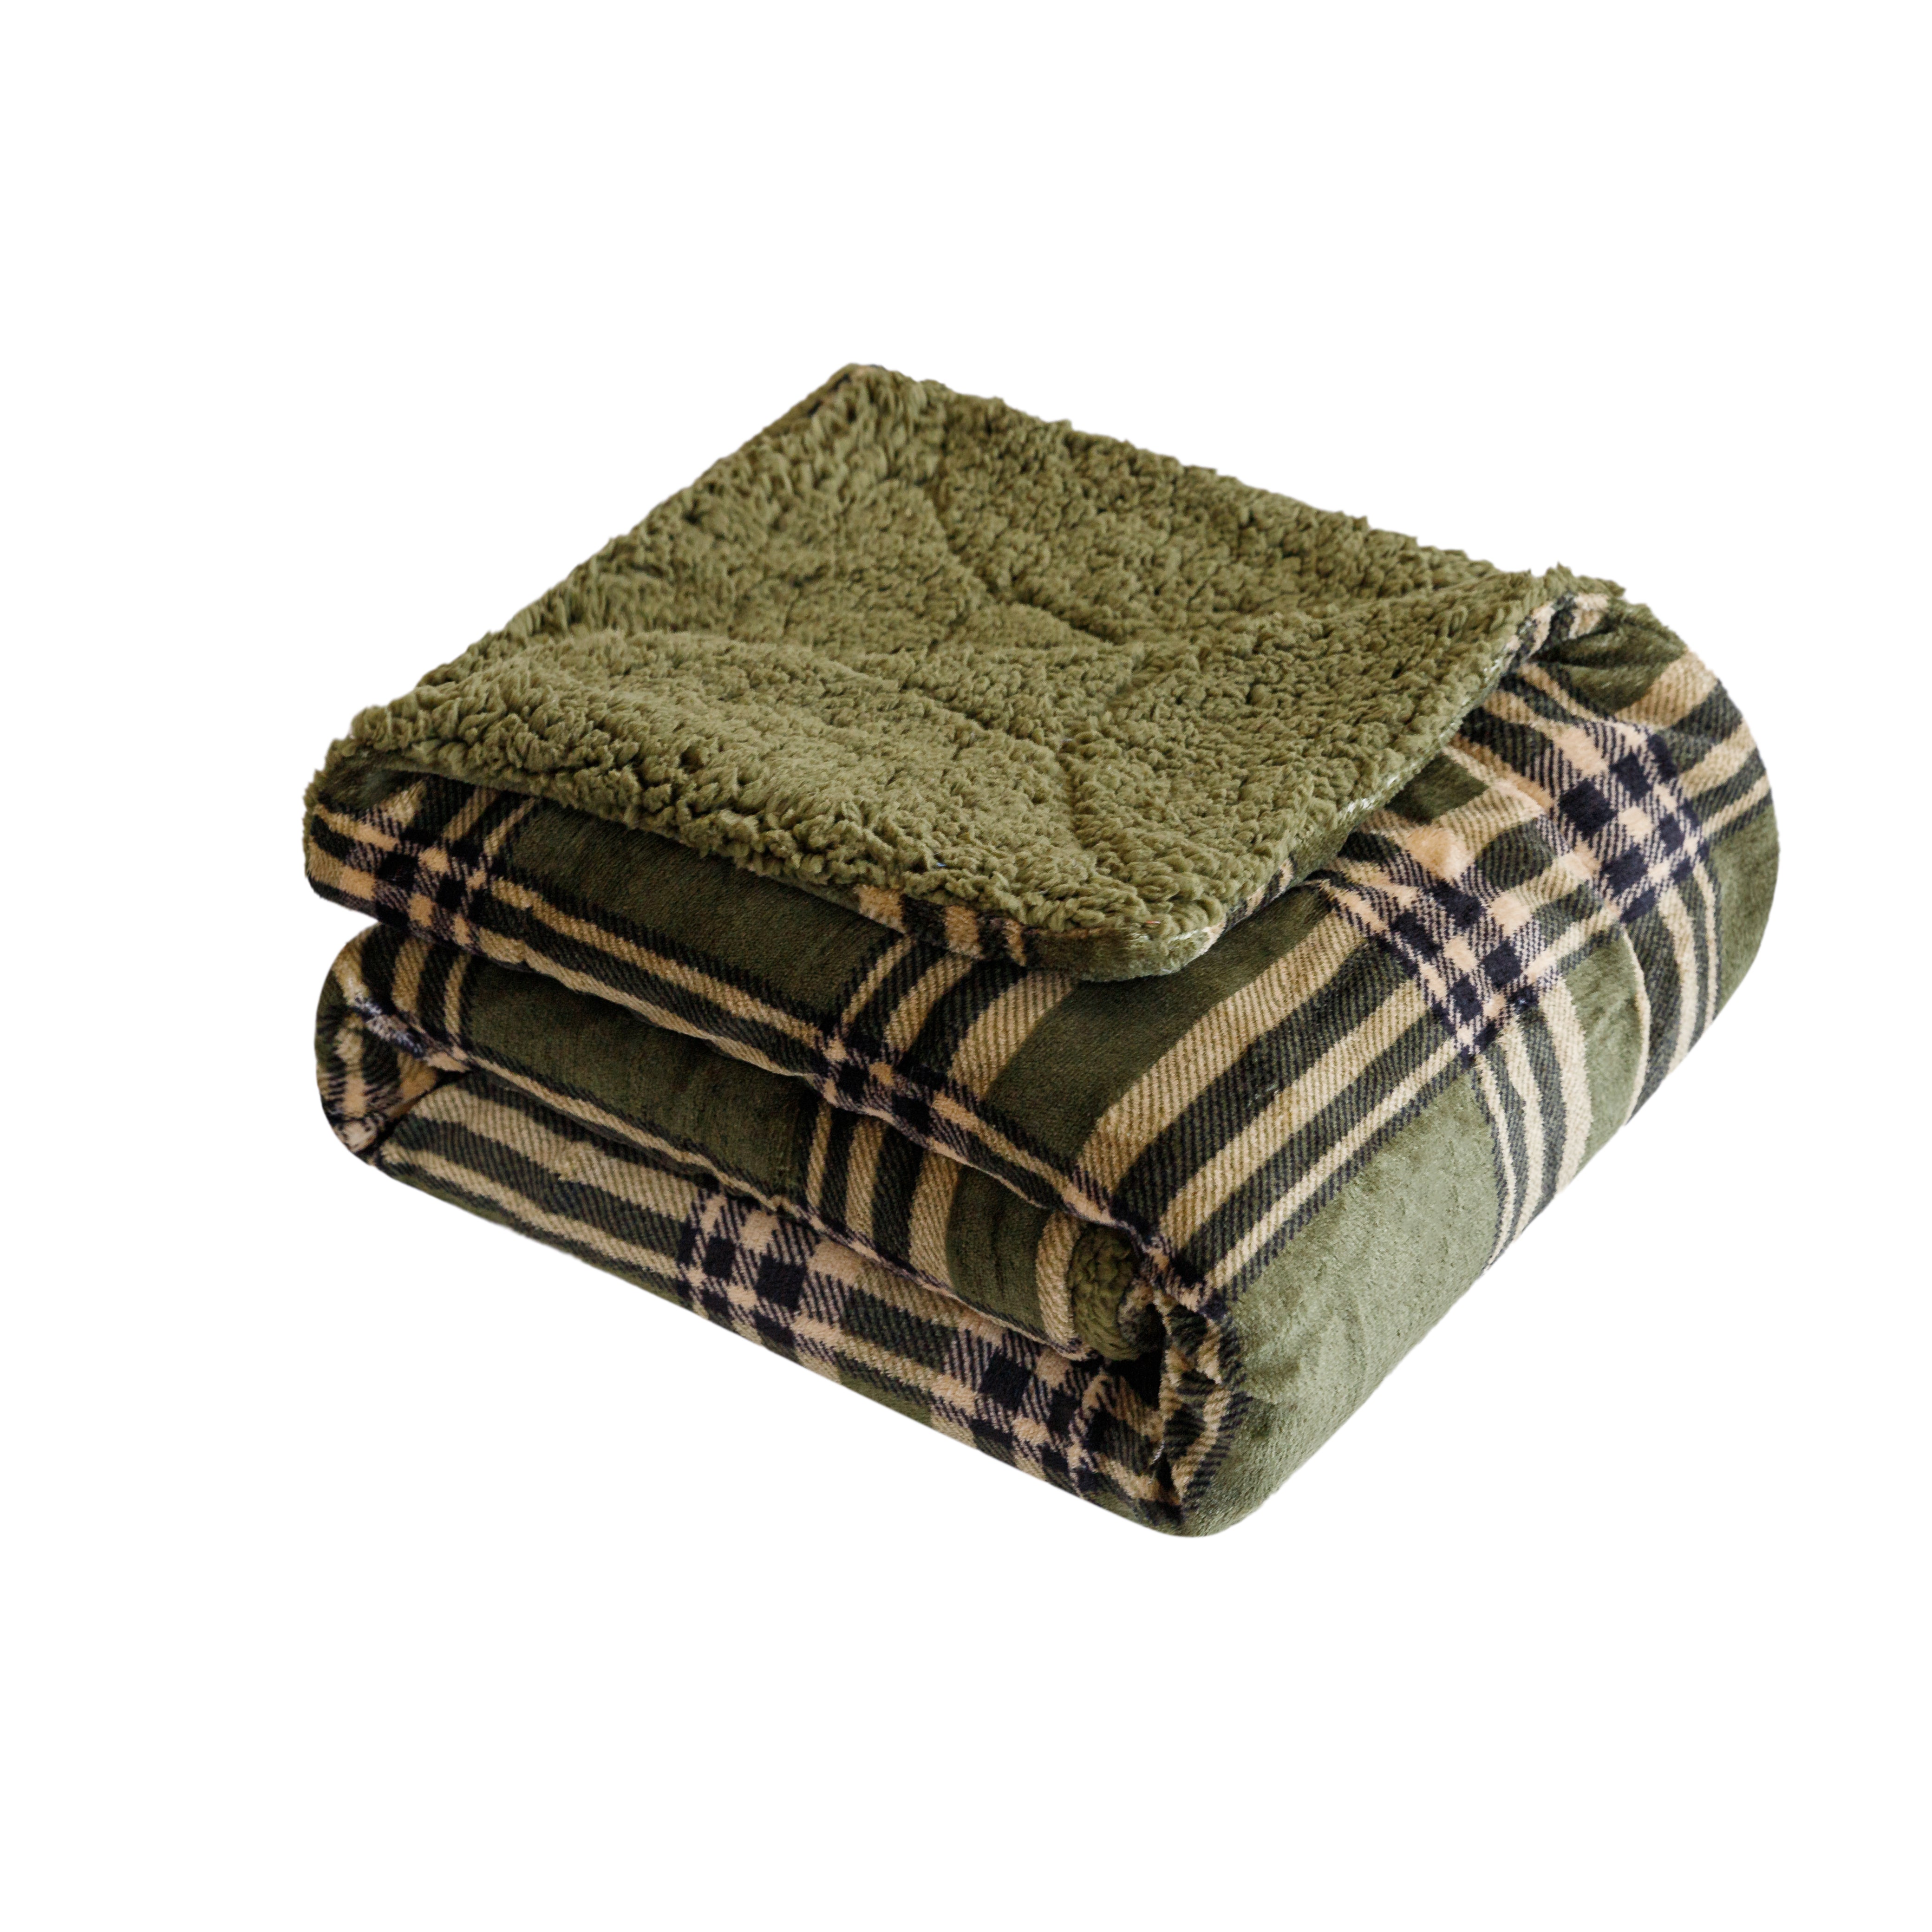 Velvet to Sherpa Throw Blanket 50 x 60 inches Modern Green Plaid to Green